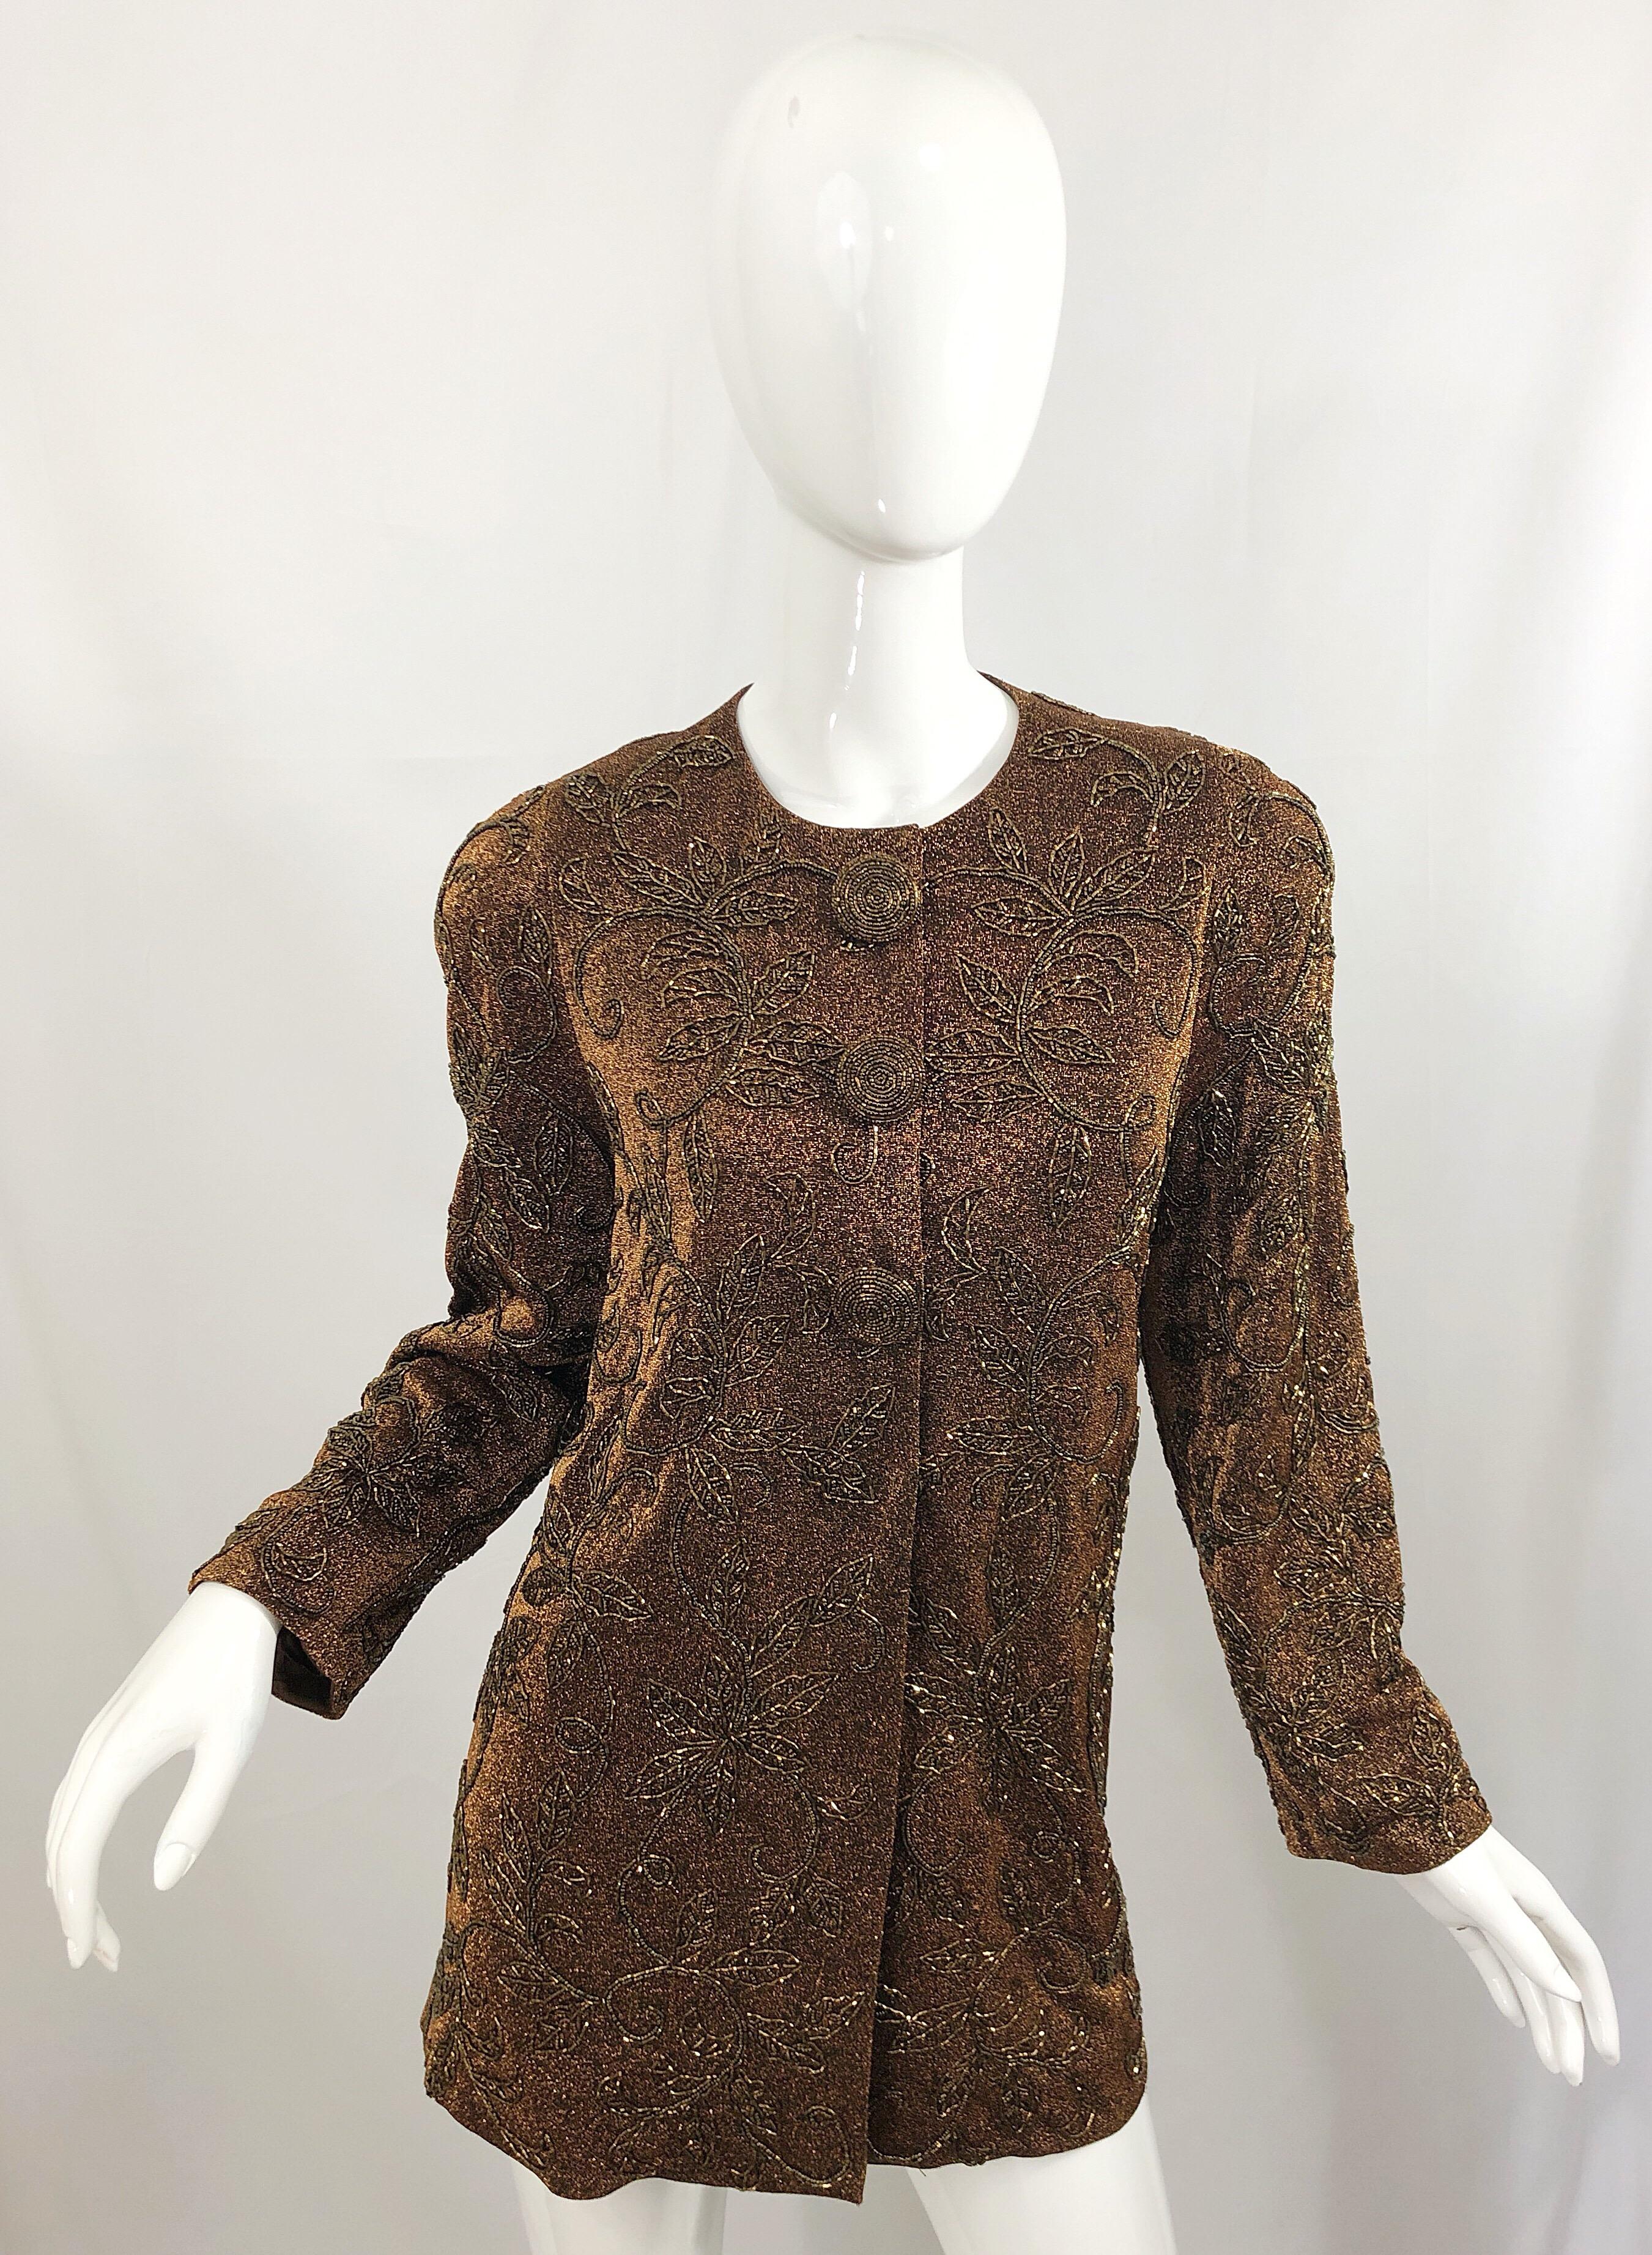 Beautiful 1990s CARMEN MARC VALVO bronze / gold metallic beaded jacket! Features thousands of hand-sewn bronze beads throughout. Large intricately beaded mock buttons feature hidden heavy duty snaps. Fully lined. Can easily be dressed up or down.